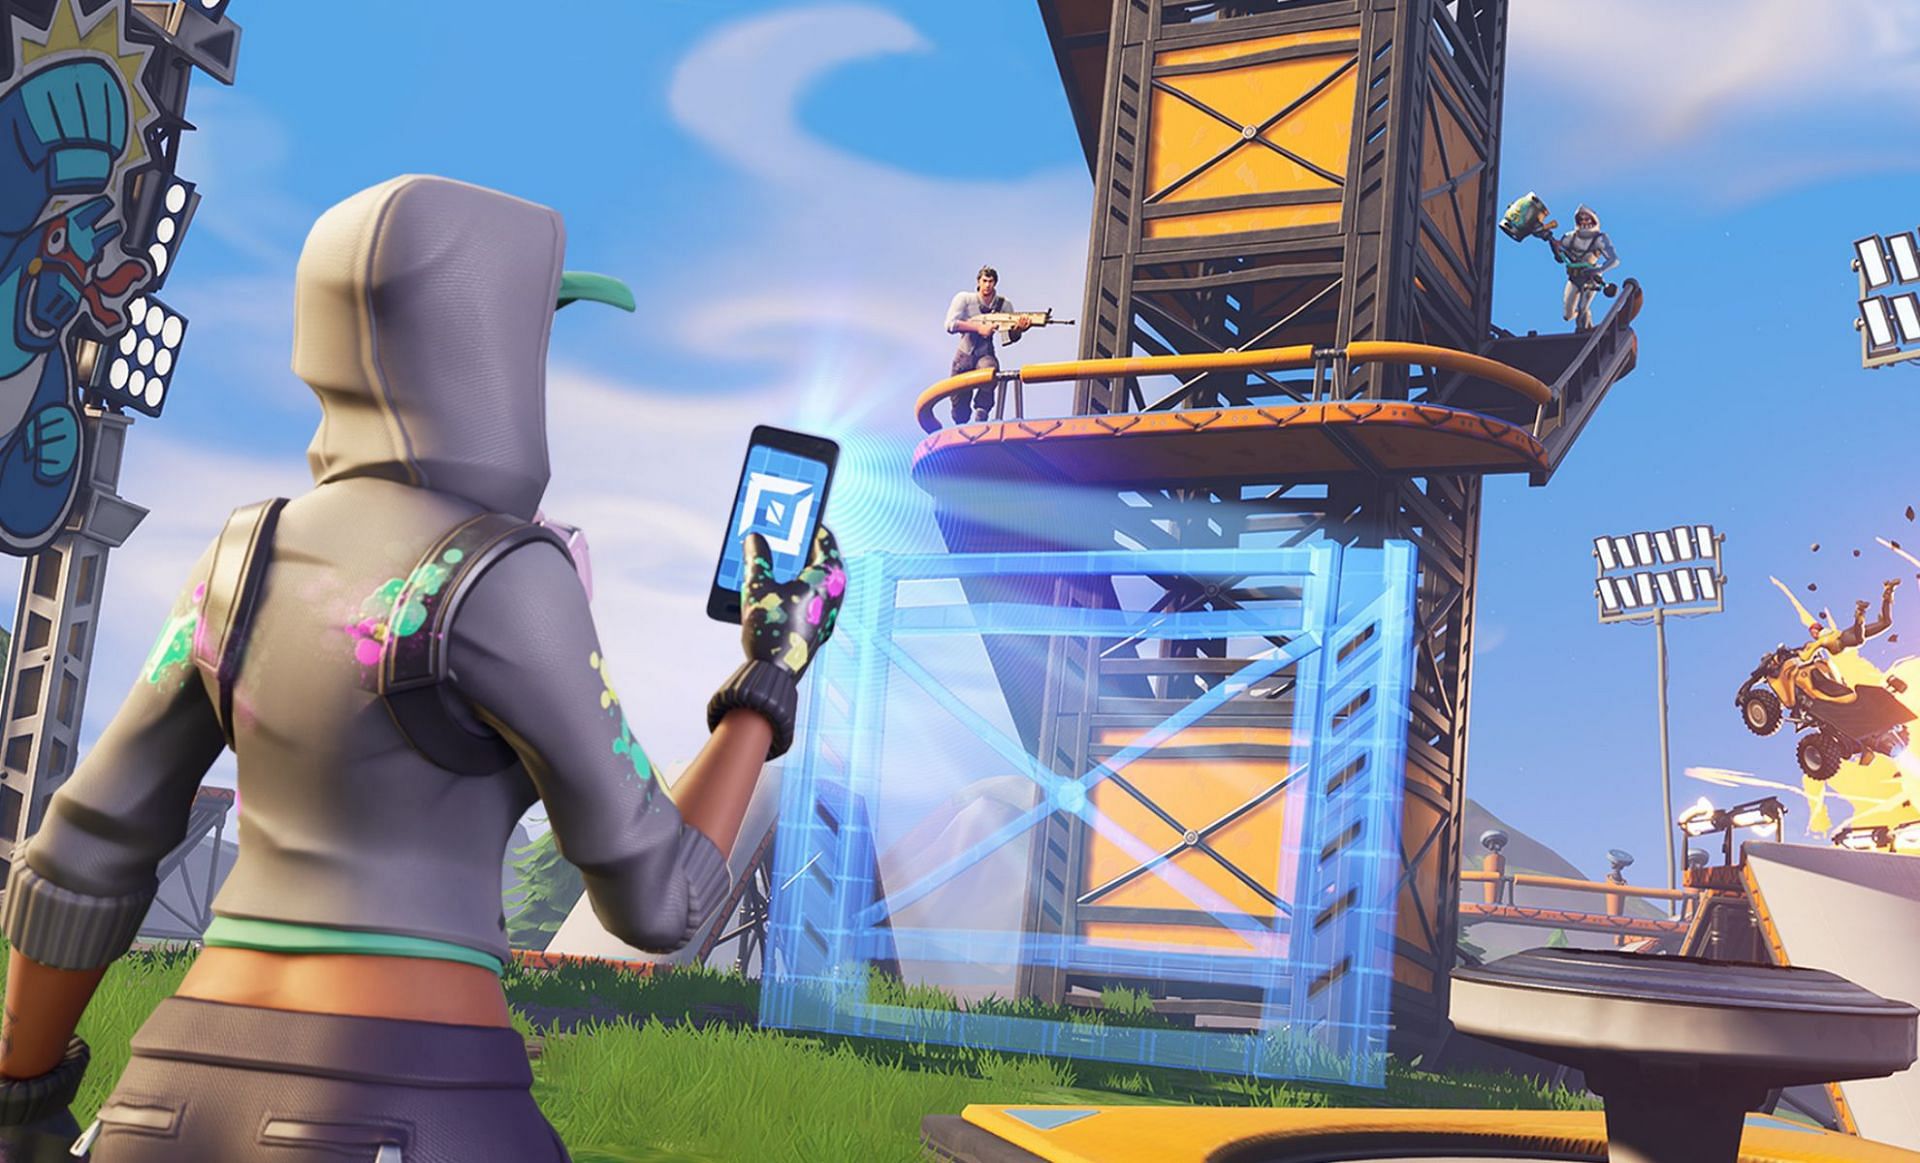 Fortnite Creative is receiving an update (Image via Epic Games)